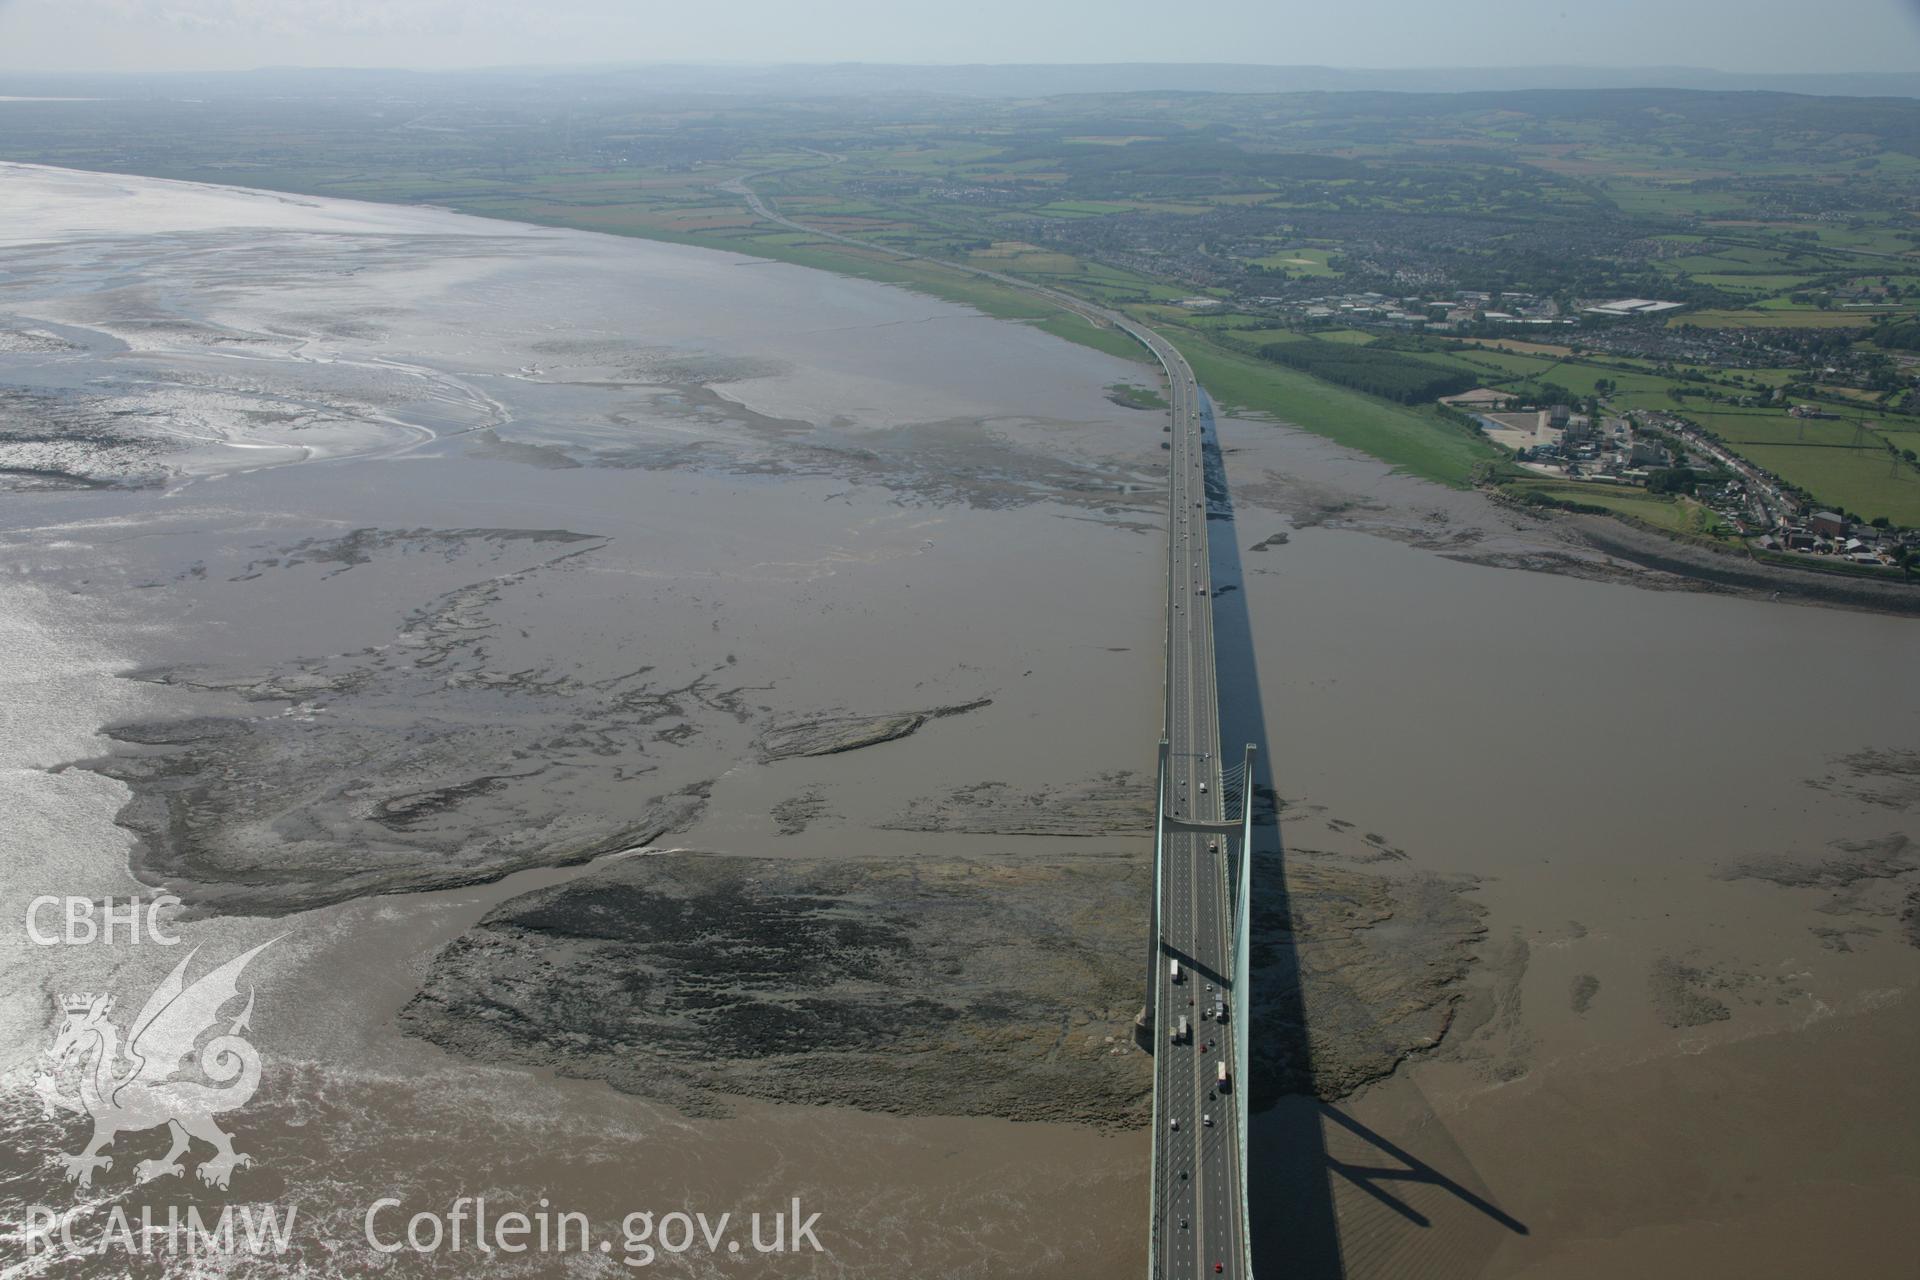 RCAHMW colour oblique aerial photograph of the Second Severn Crossing. Taken on 13 July 2006 by Toby Driver.